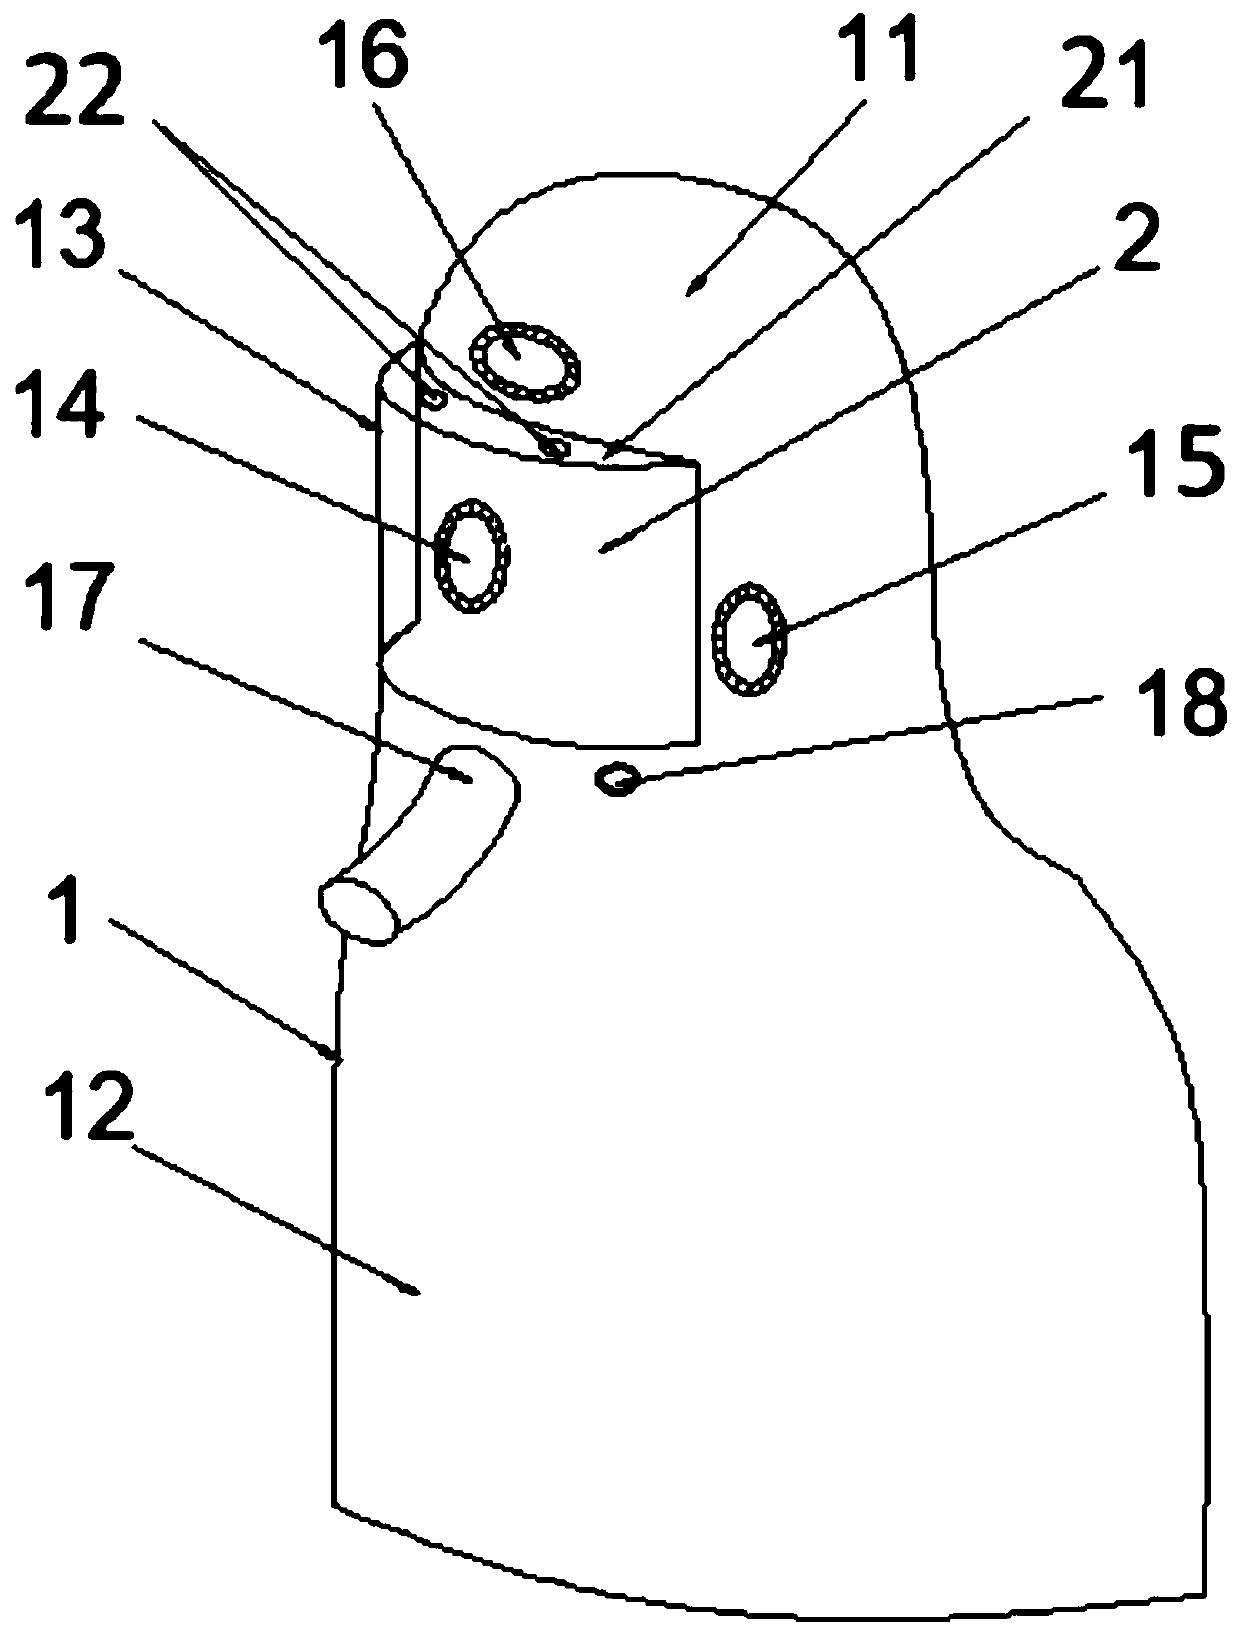 Protective isolation device for oral diagnosis and treatment